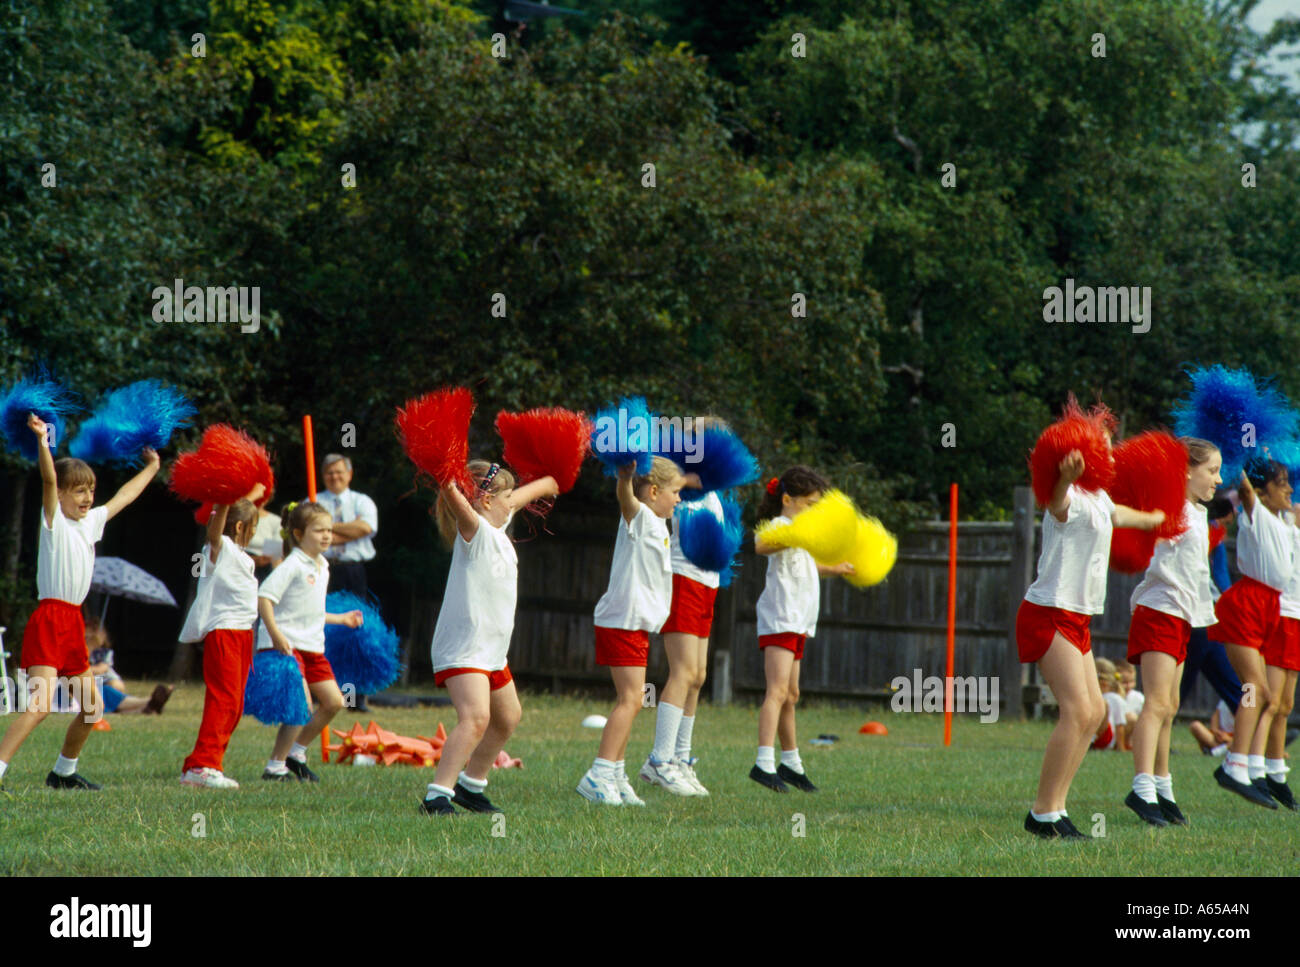 Cheerleaders at School Sports Day at Primary School Stock Photo